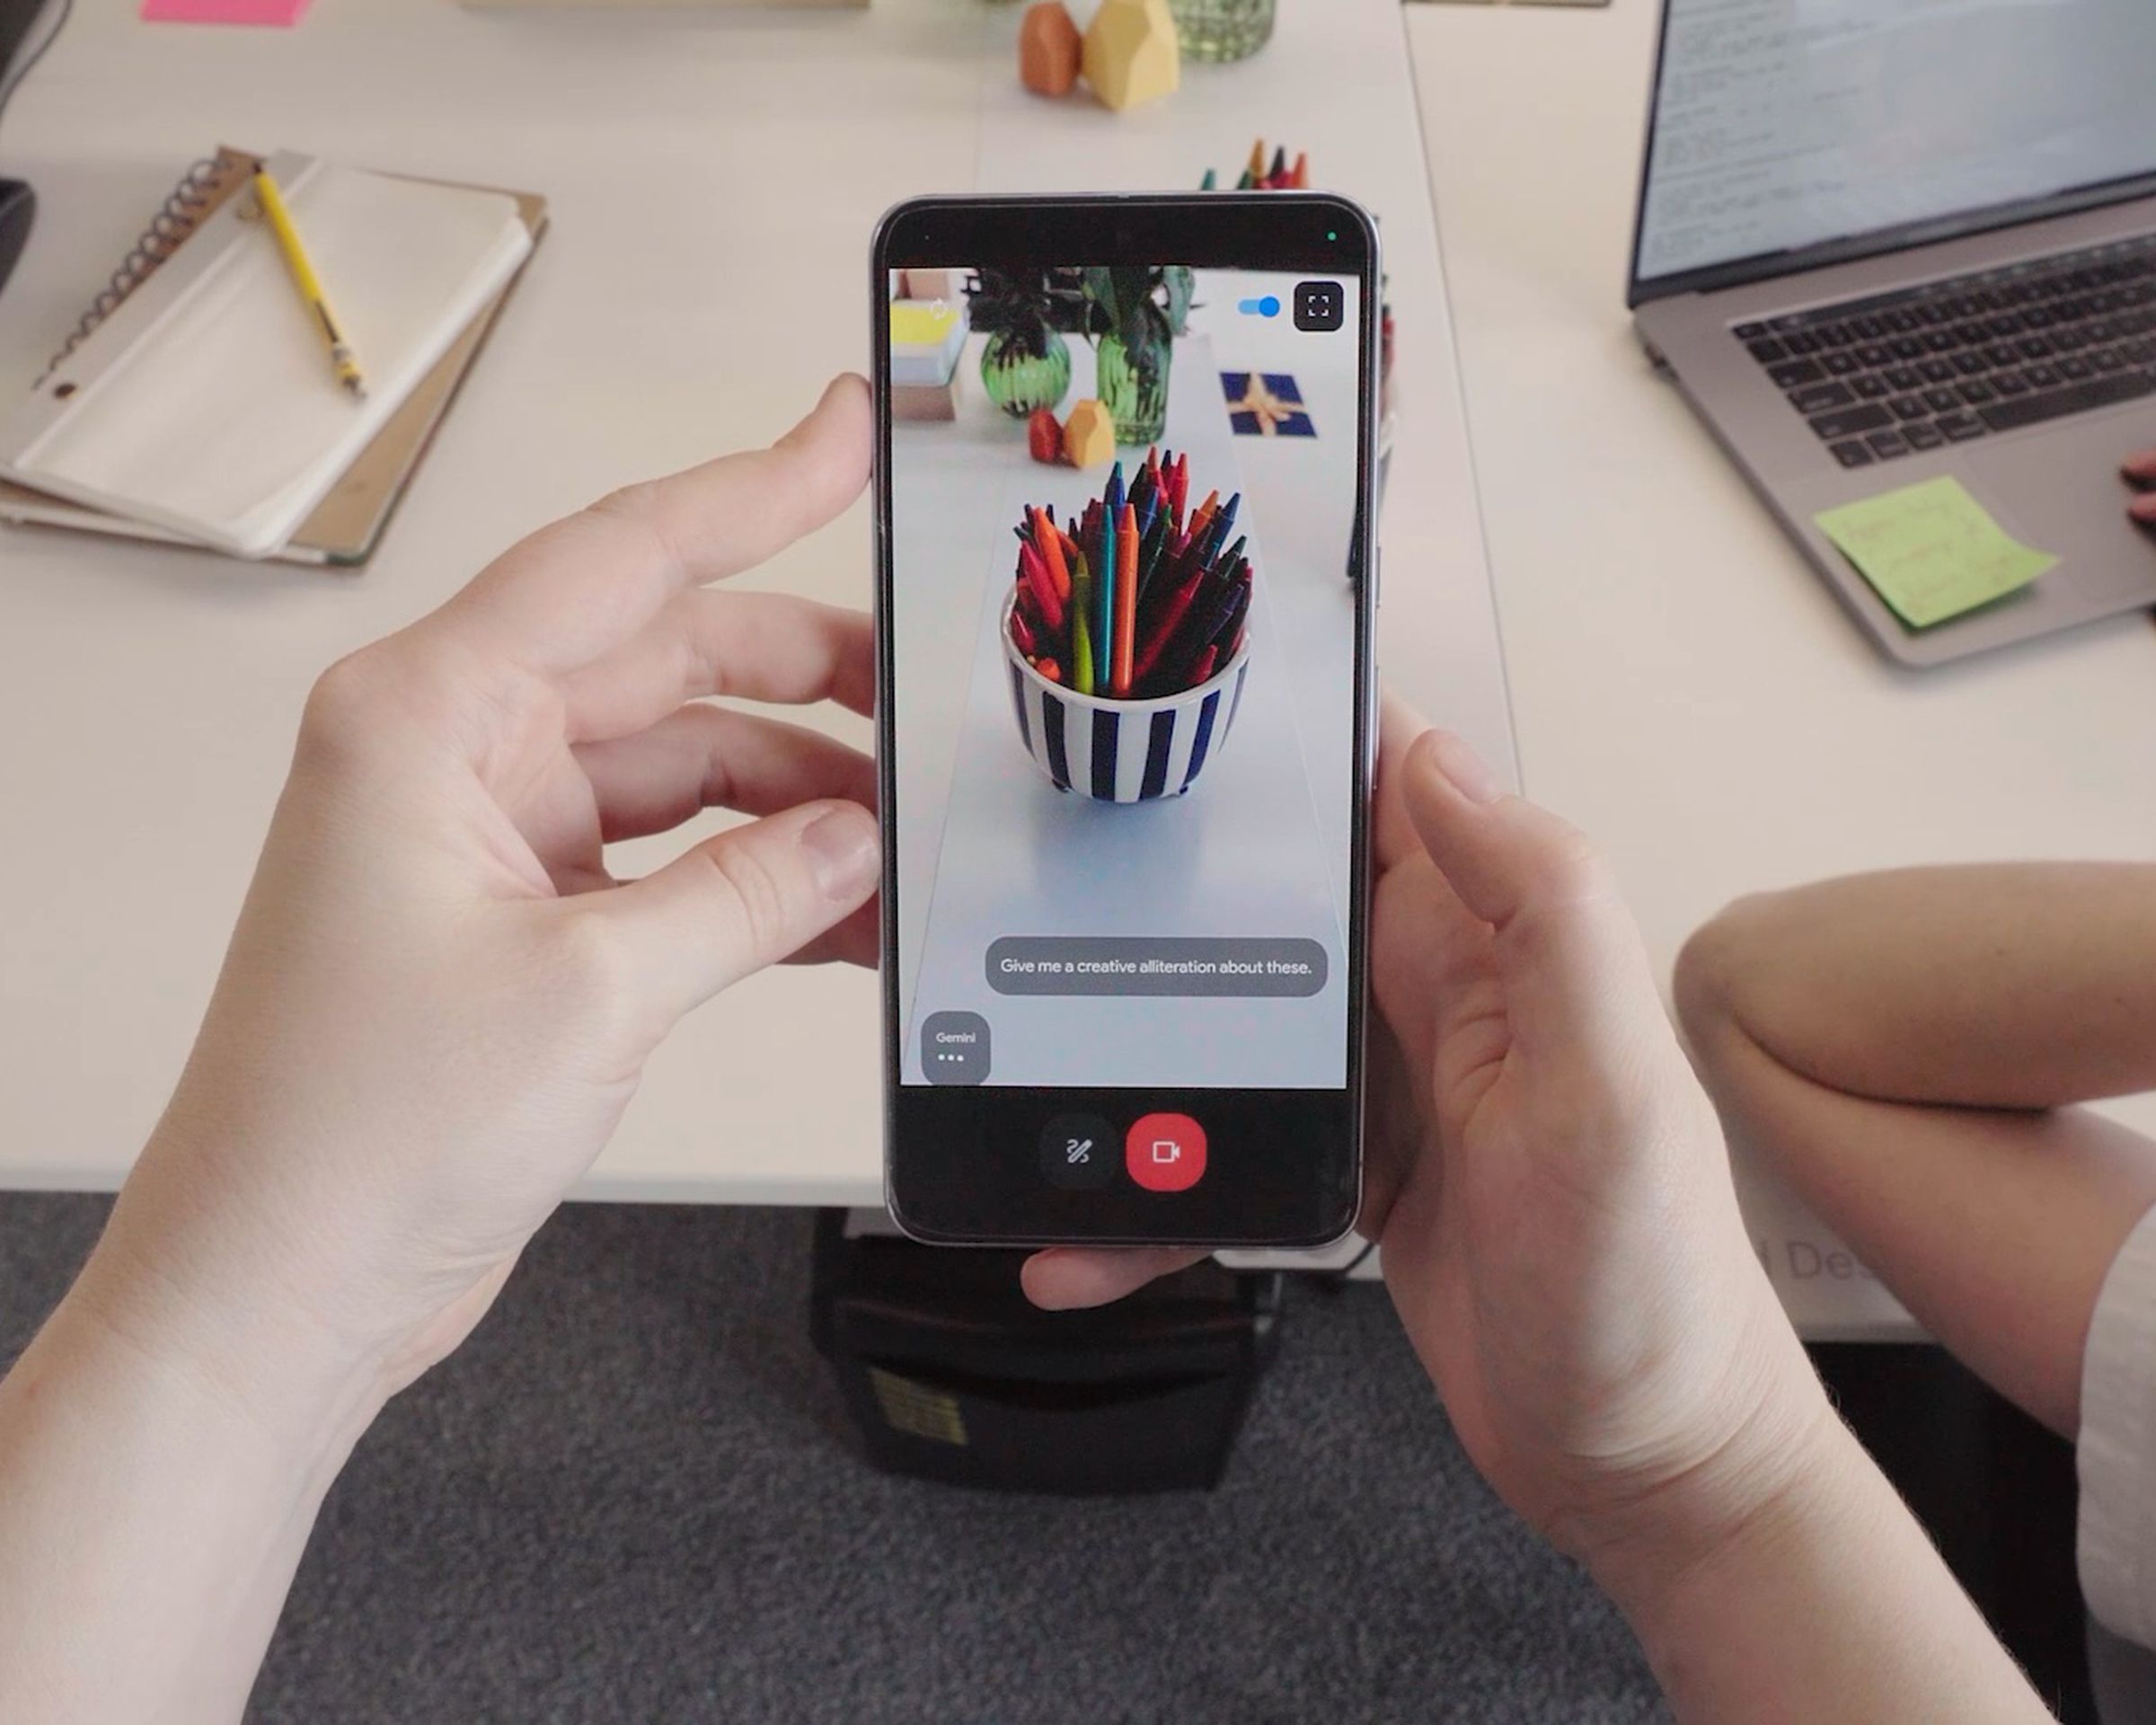 A still from a video showing a phone identifying a bowl of markers.